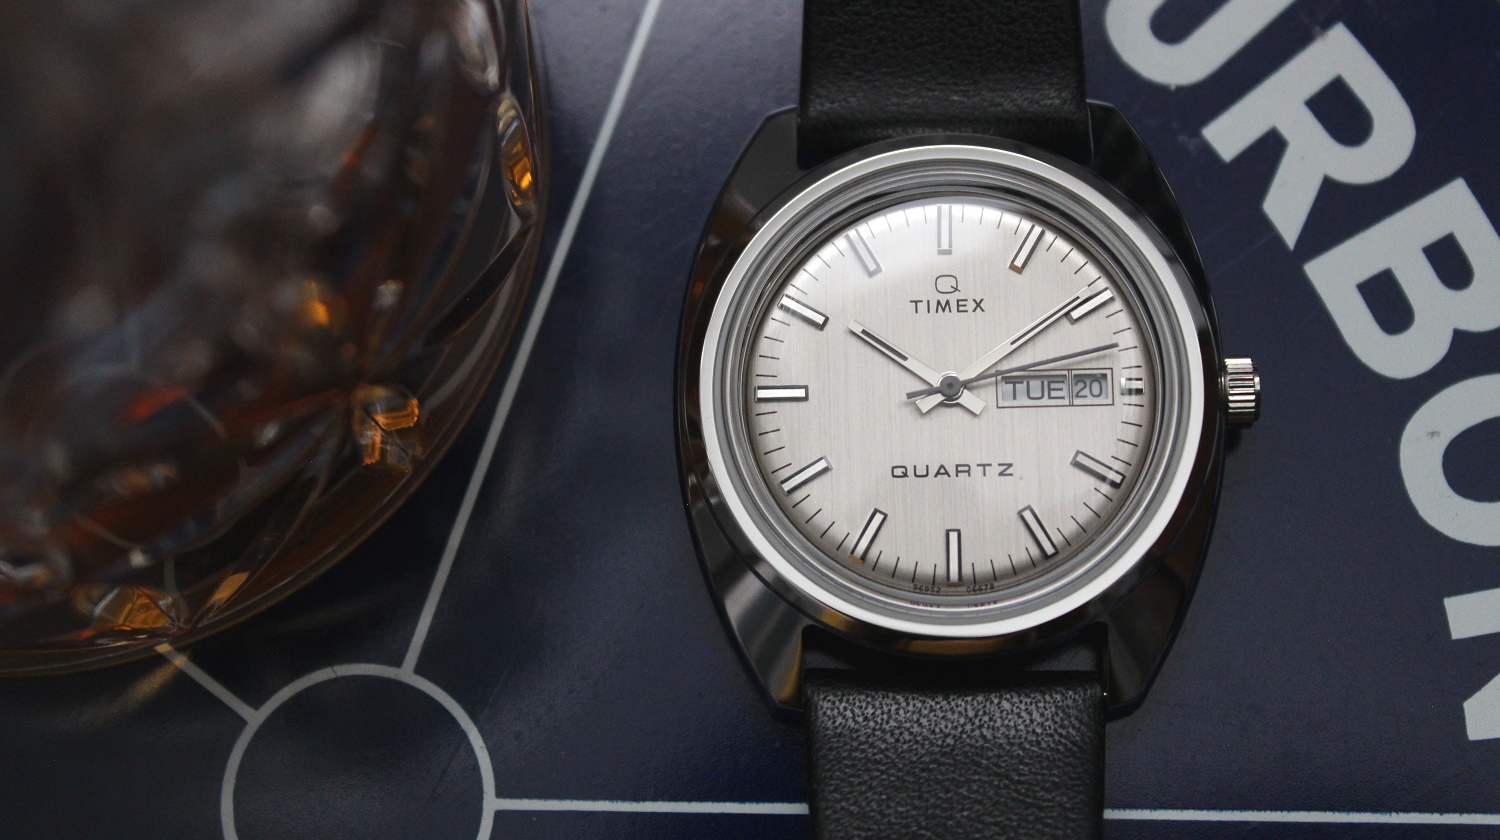 In Review: The Q Timex 1978 Reissue